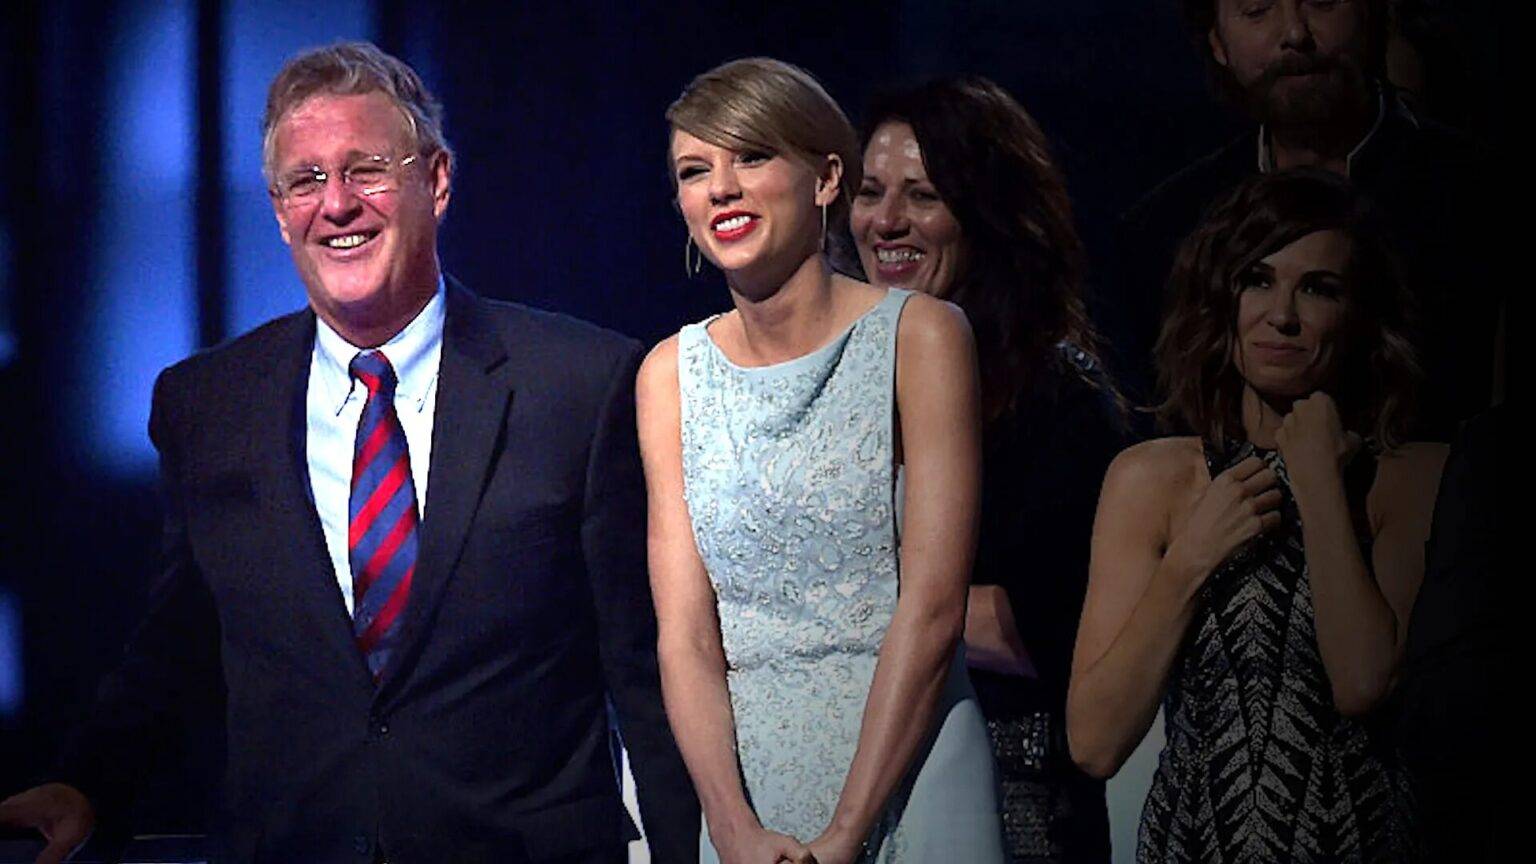 Taylor Swift's father escapes charge over alleged Australia assault